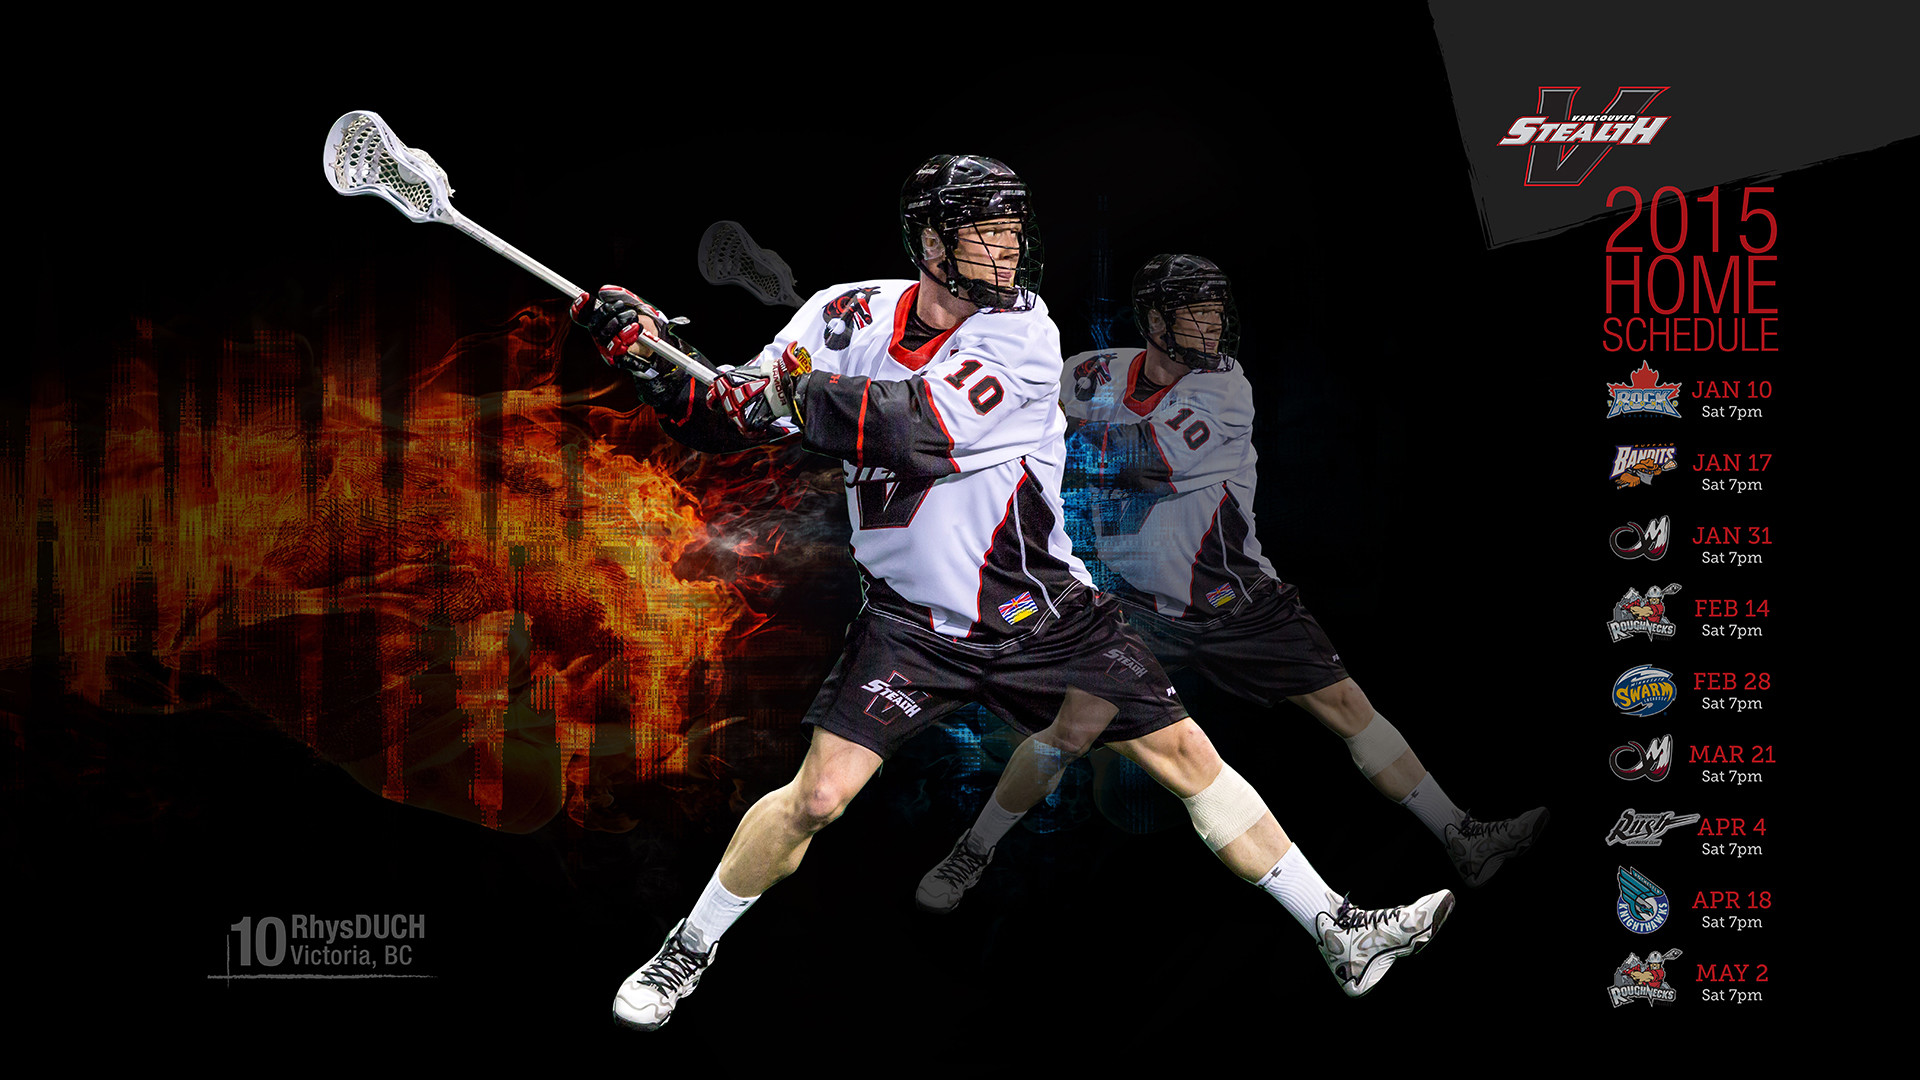 lacrosse wallpaper,lacrosse,stick and ball games,lacrosse stick,stick and ball sports,player